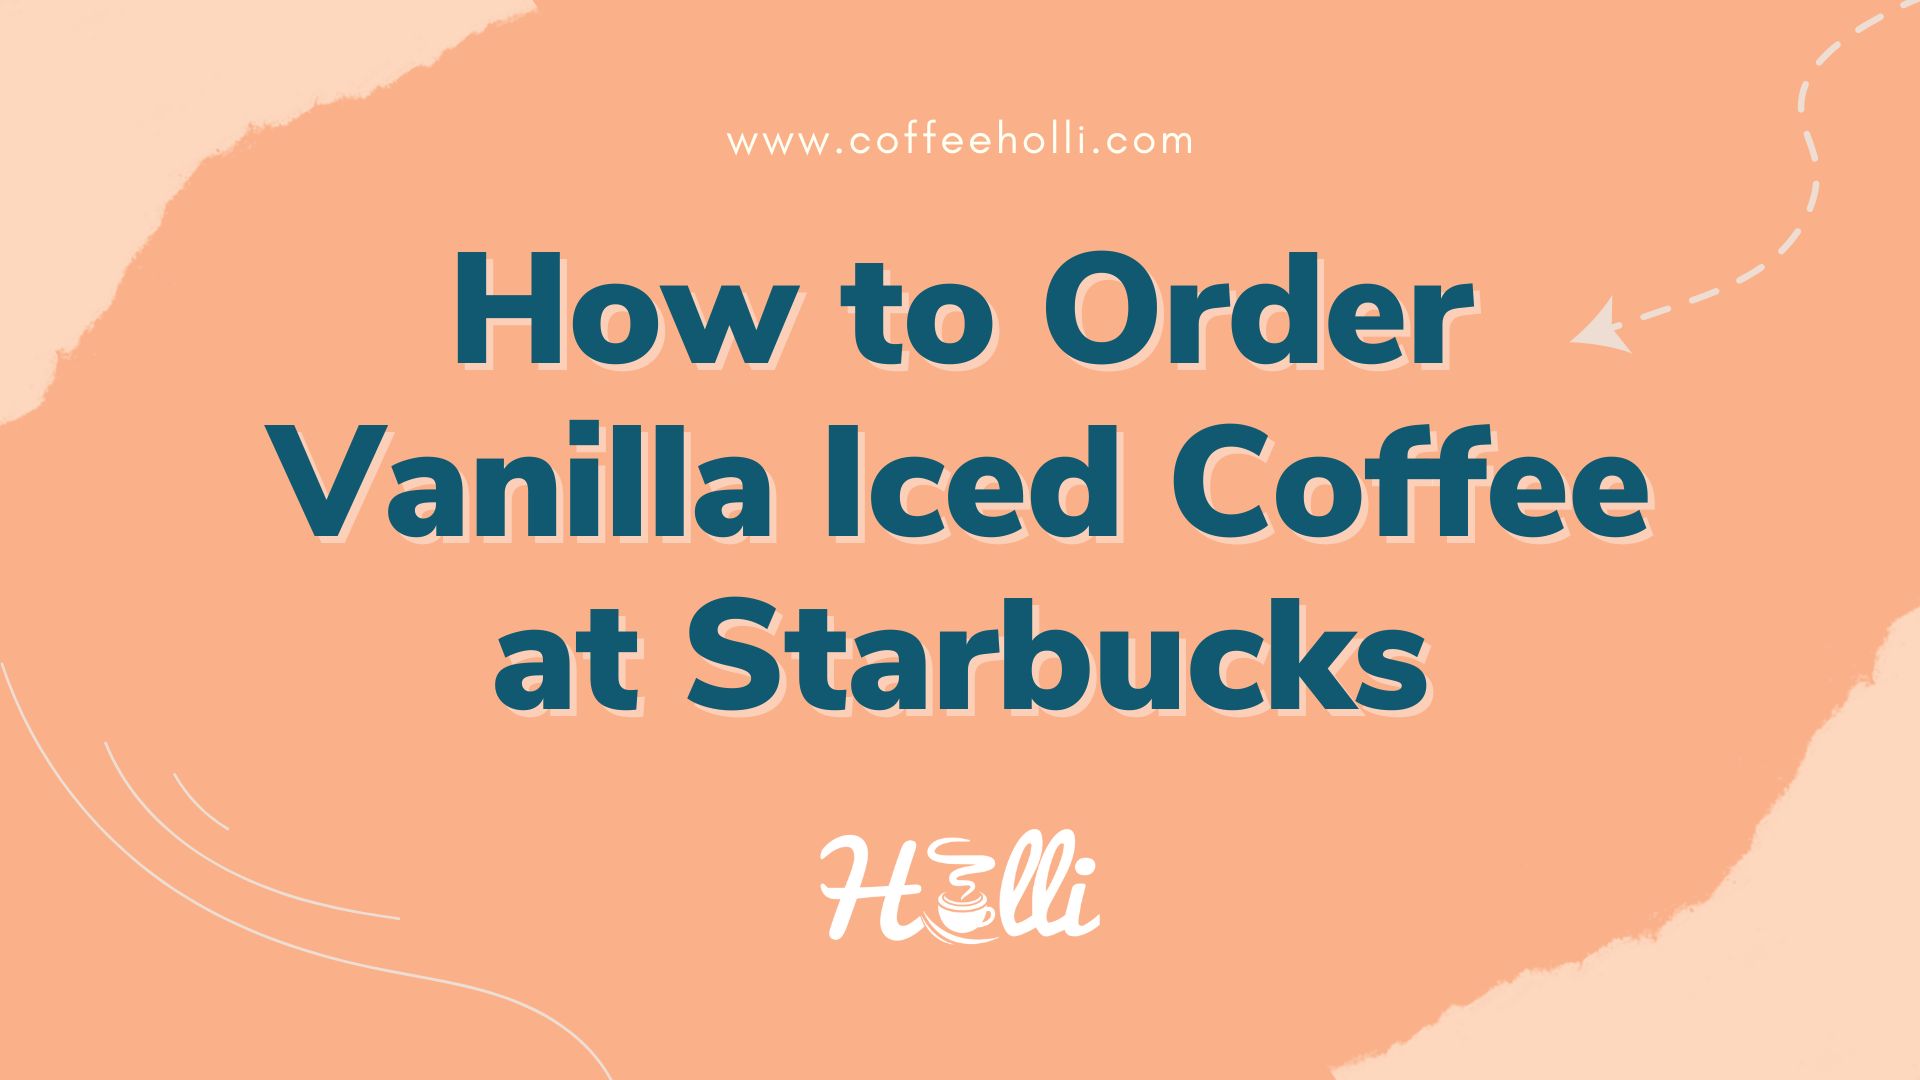 How to Order Vanilla Iced Coffee at Starbucks